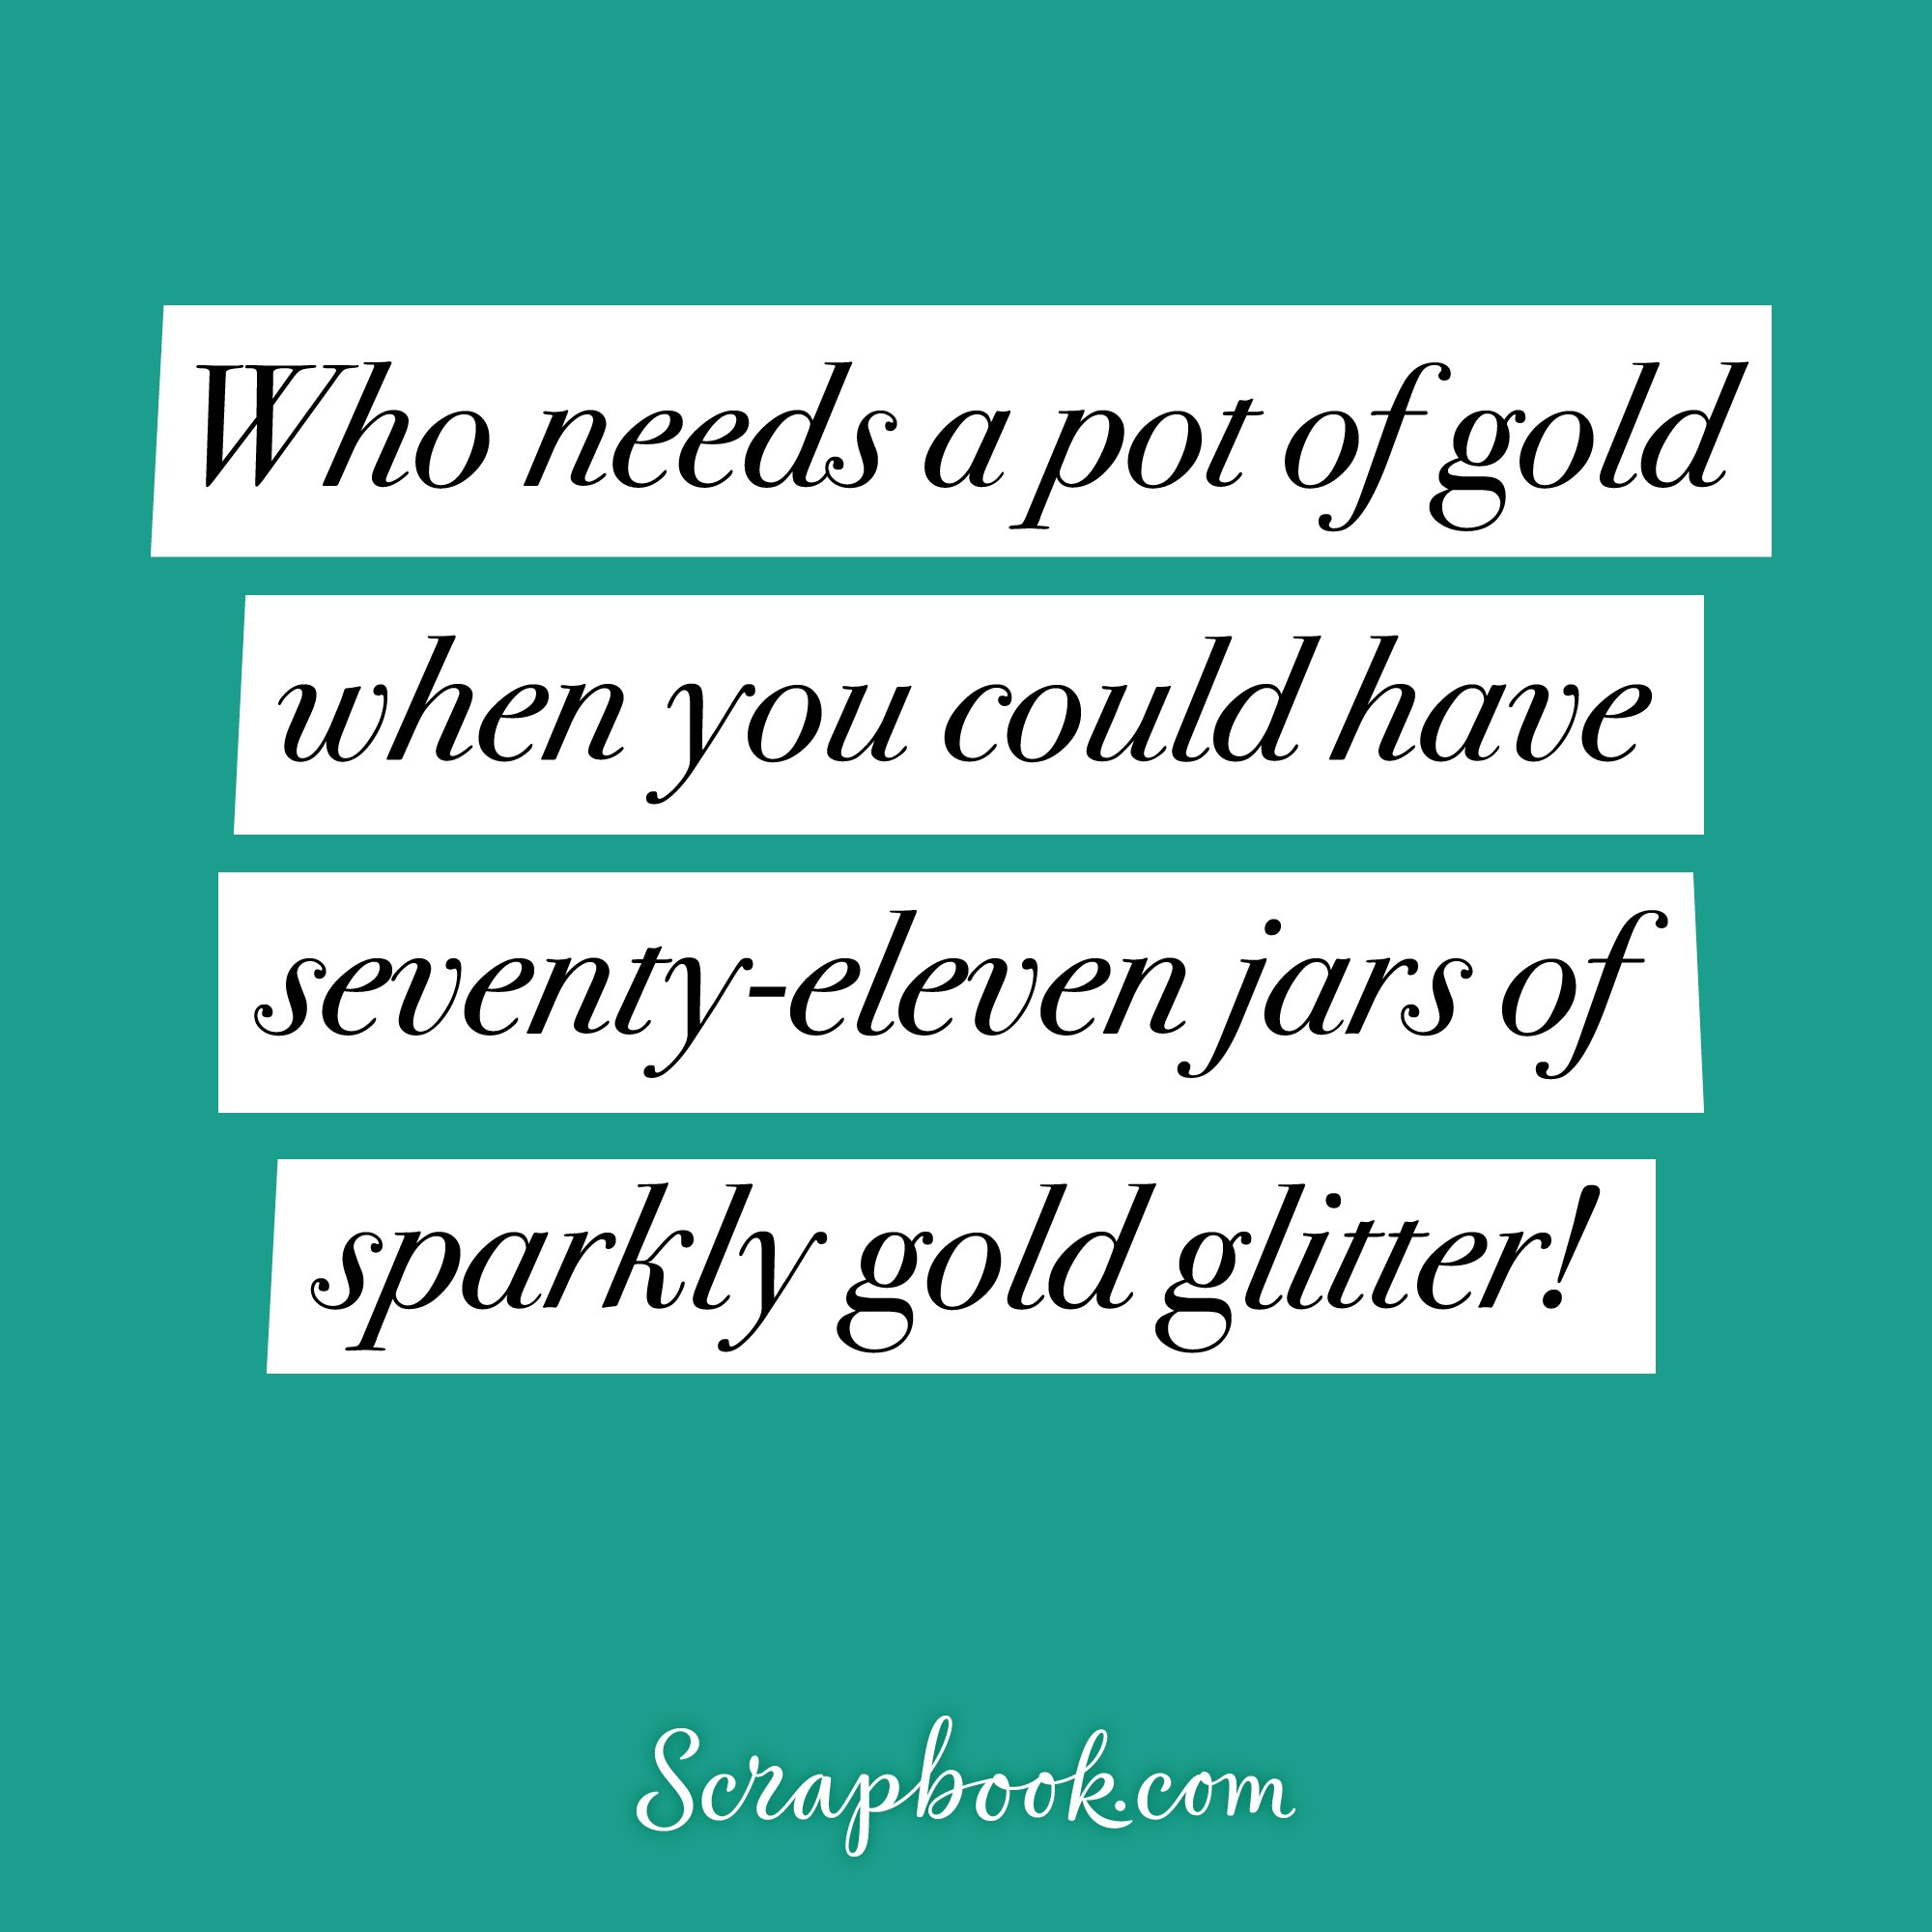 Who needs a pot of gold when you could have seventy-eleven jars of sparkly gold glitter!